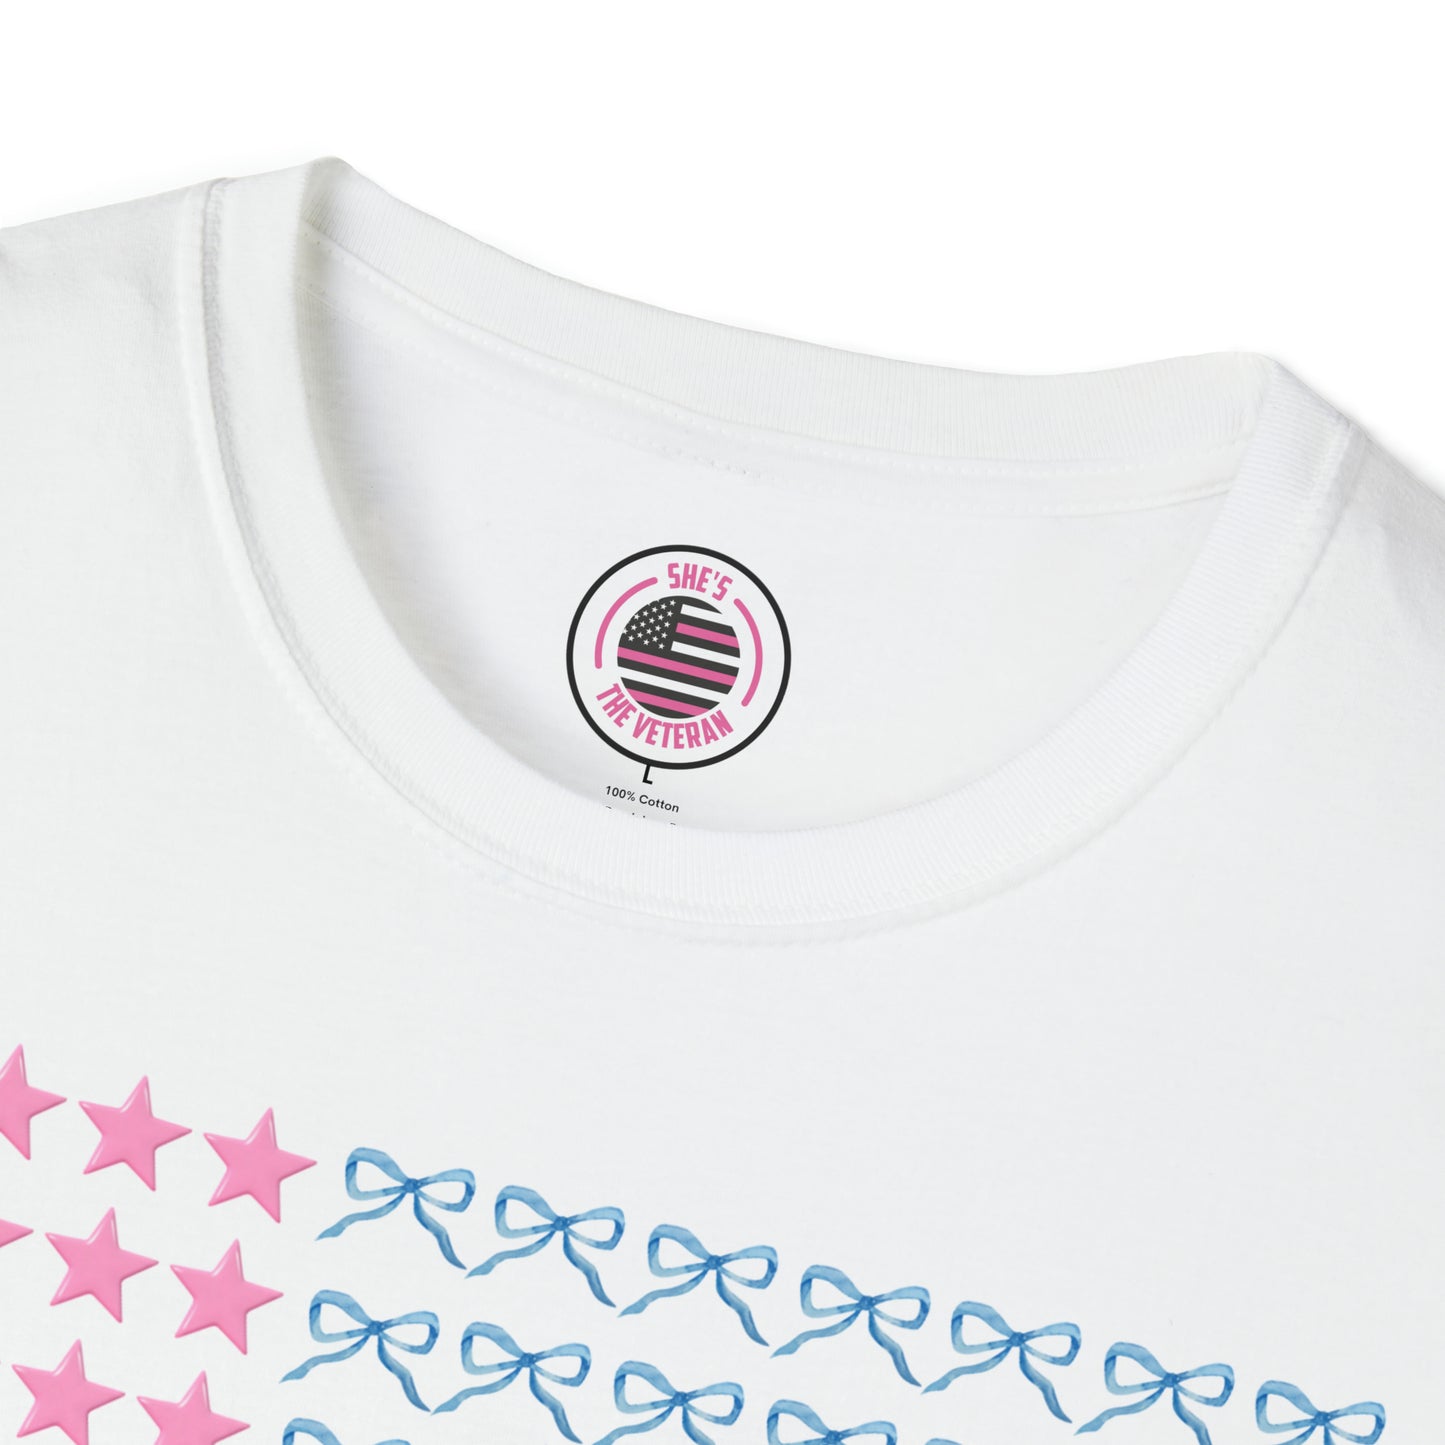 Stars and Bows! Softstyle T-Shirt, Unisex Fit